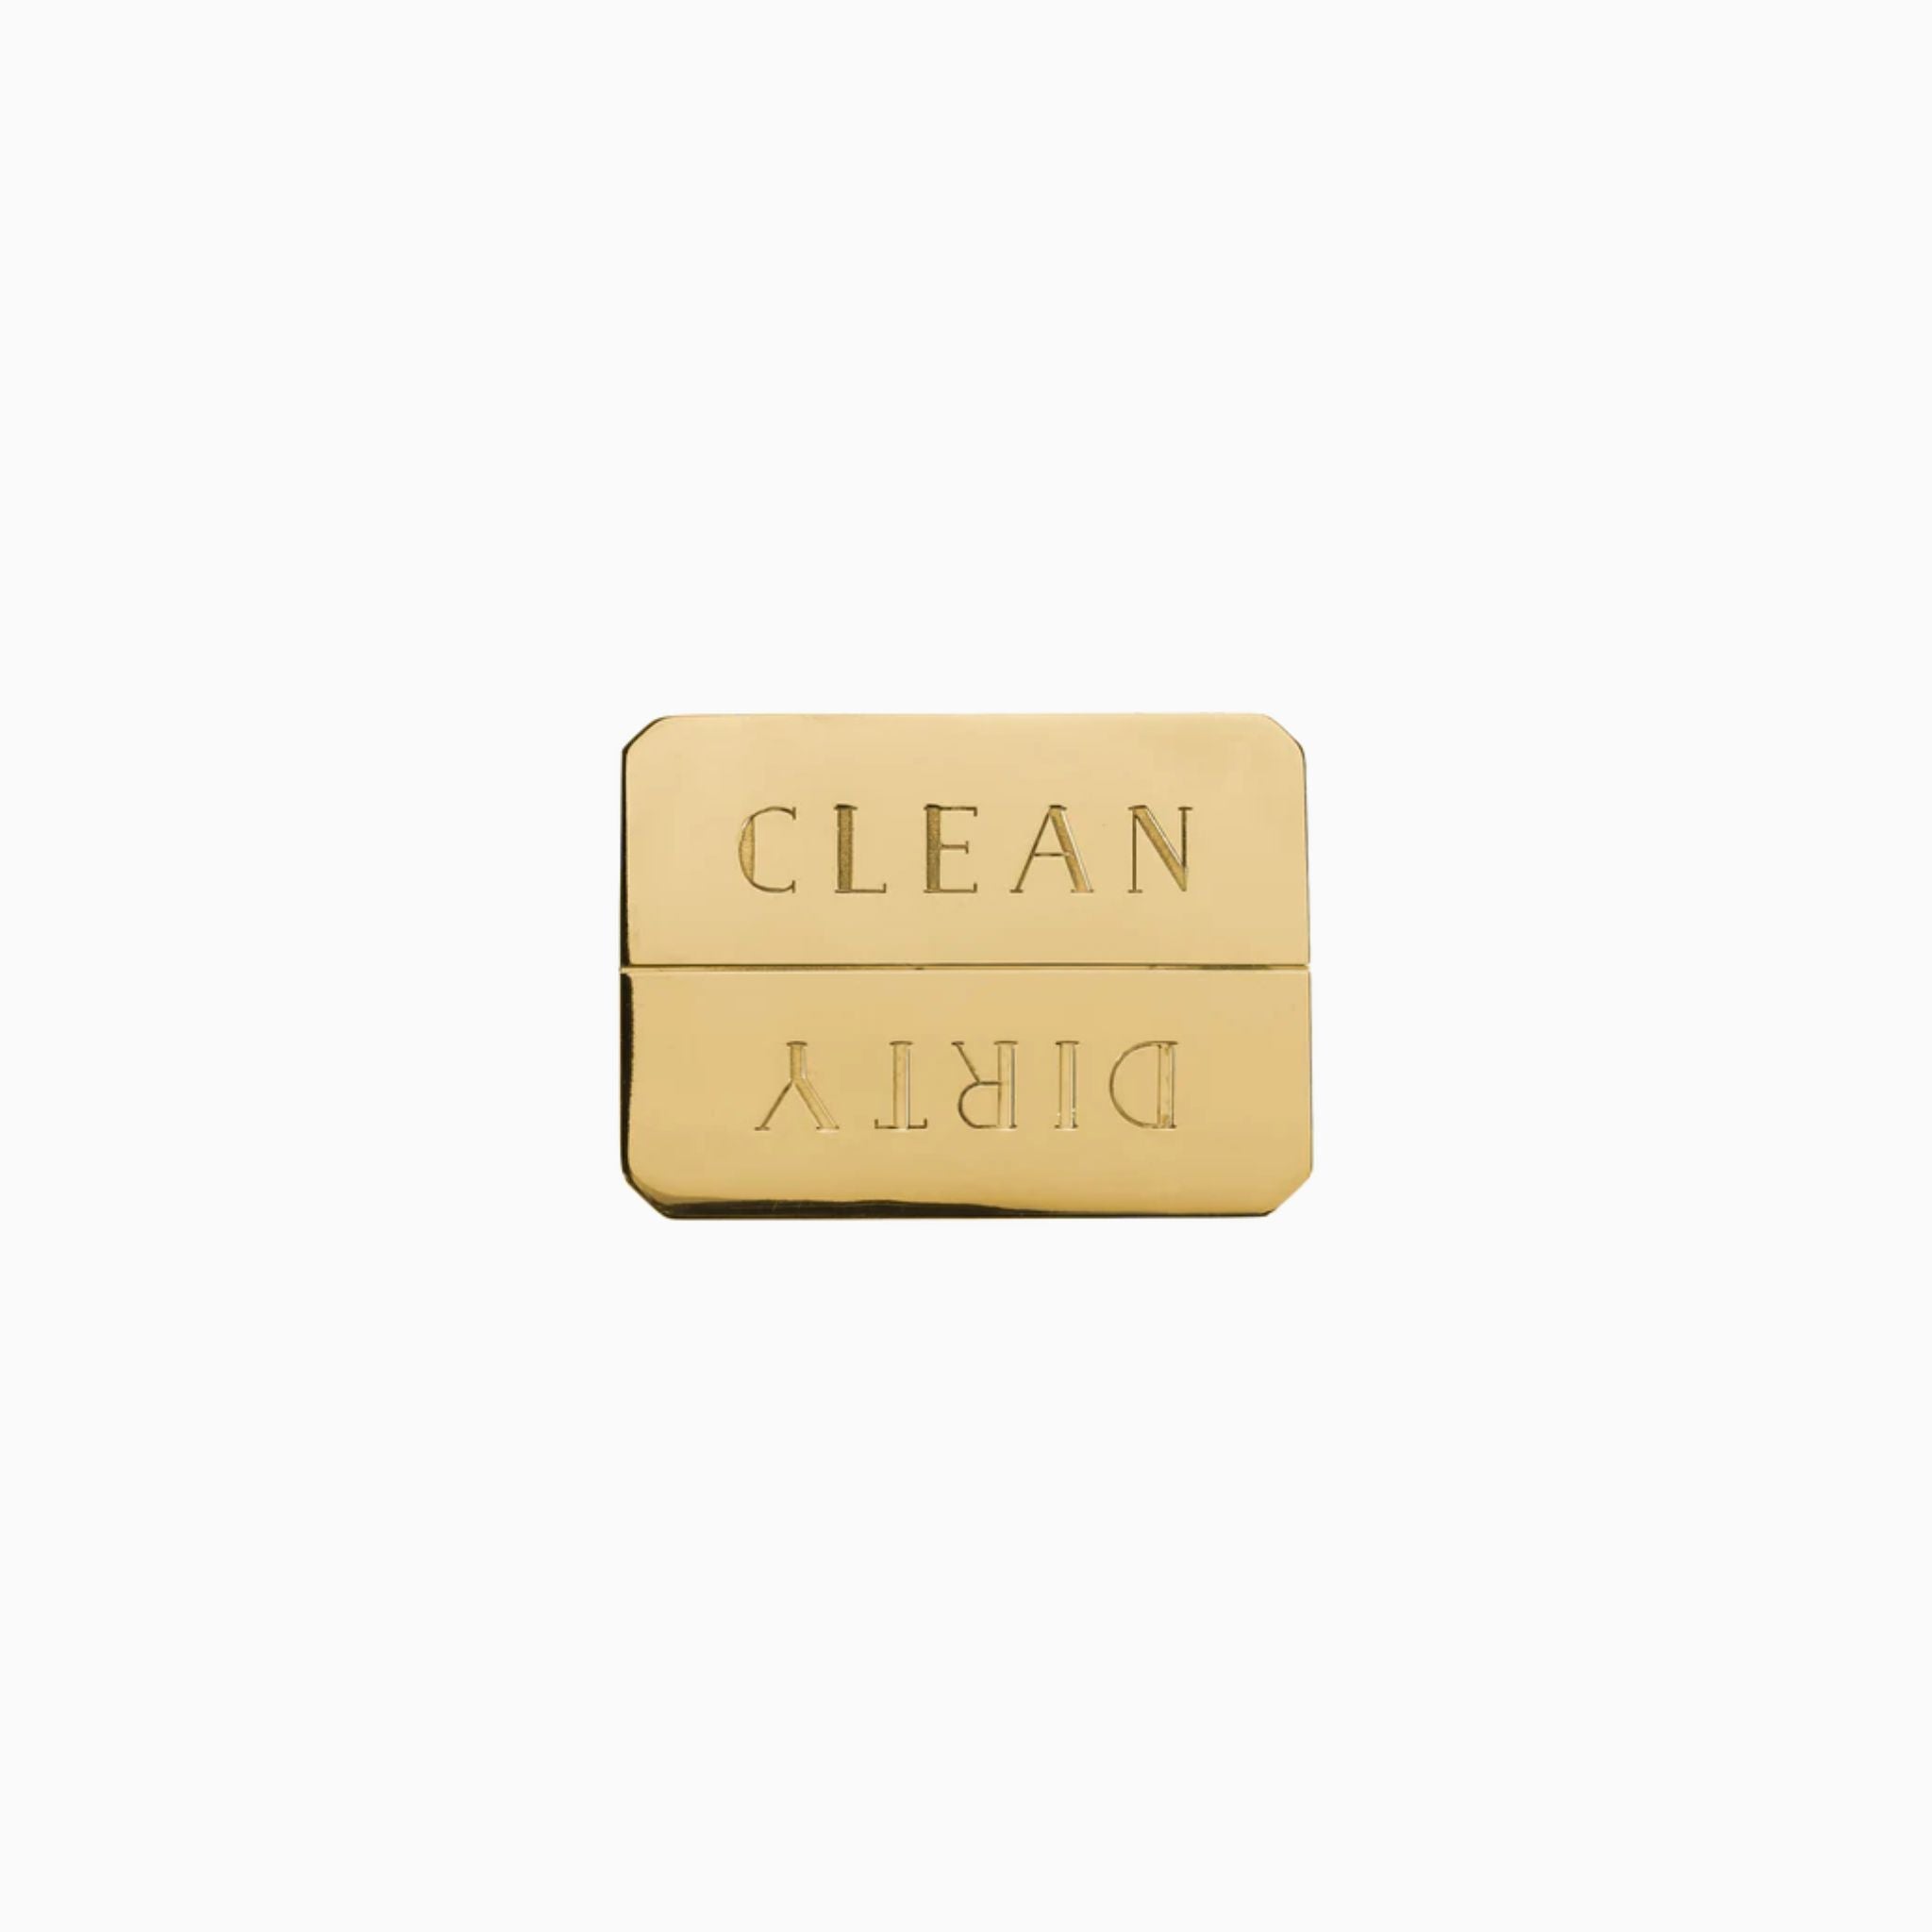 Simply Elevated - Brass Dishwasher Magnet - Let the household know the status of the dishwasher with our sturdy beveled magnet, engraved with the words “Dirty” and “Clean”, in either solid brass or nickel-plated brass. No more post-its!